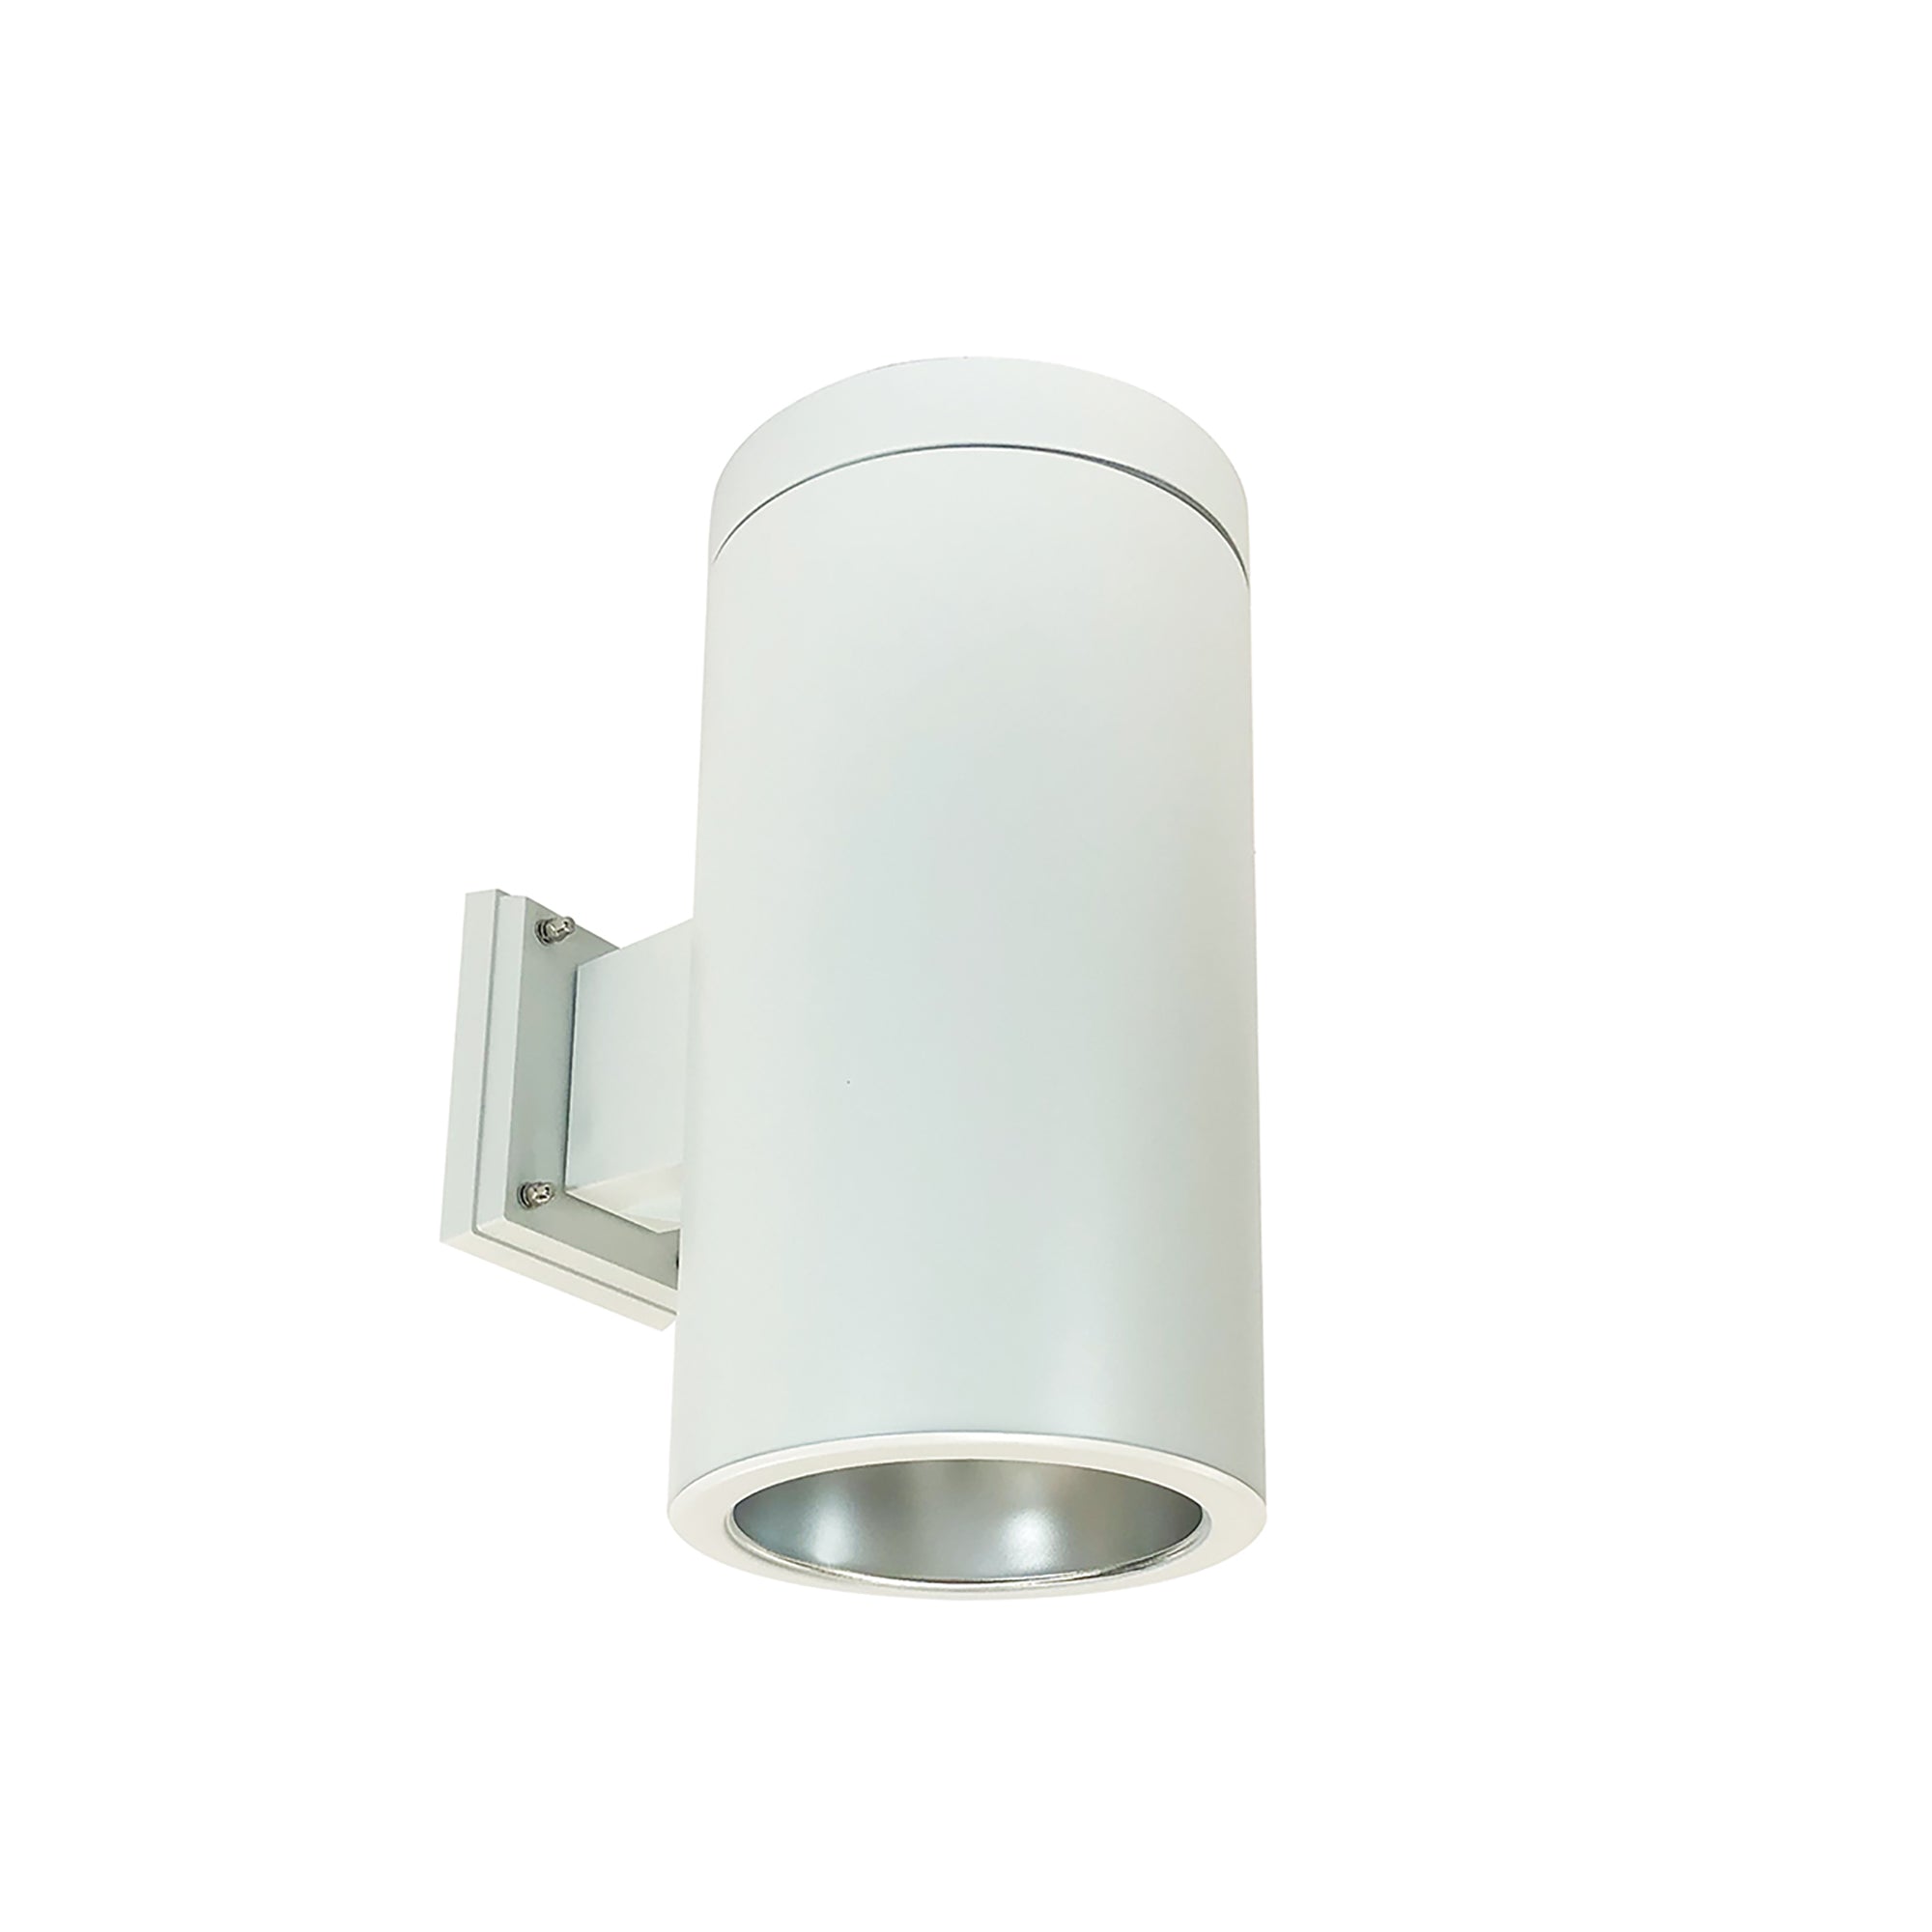 Nora Lighting NYLS2-6W15140MDWW6/PEM - Cylinder - 6 Inch CYL WALL MNT 1500L 40K REF. MEDIUM . DIFF/WH FLANGE 120-277V WH CYL, WIRED FOR EM